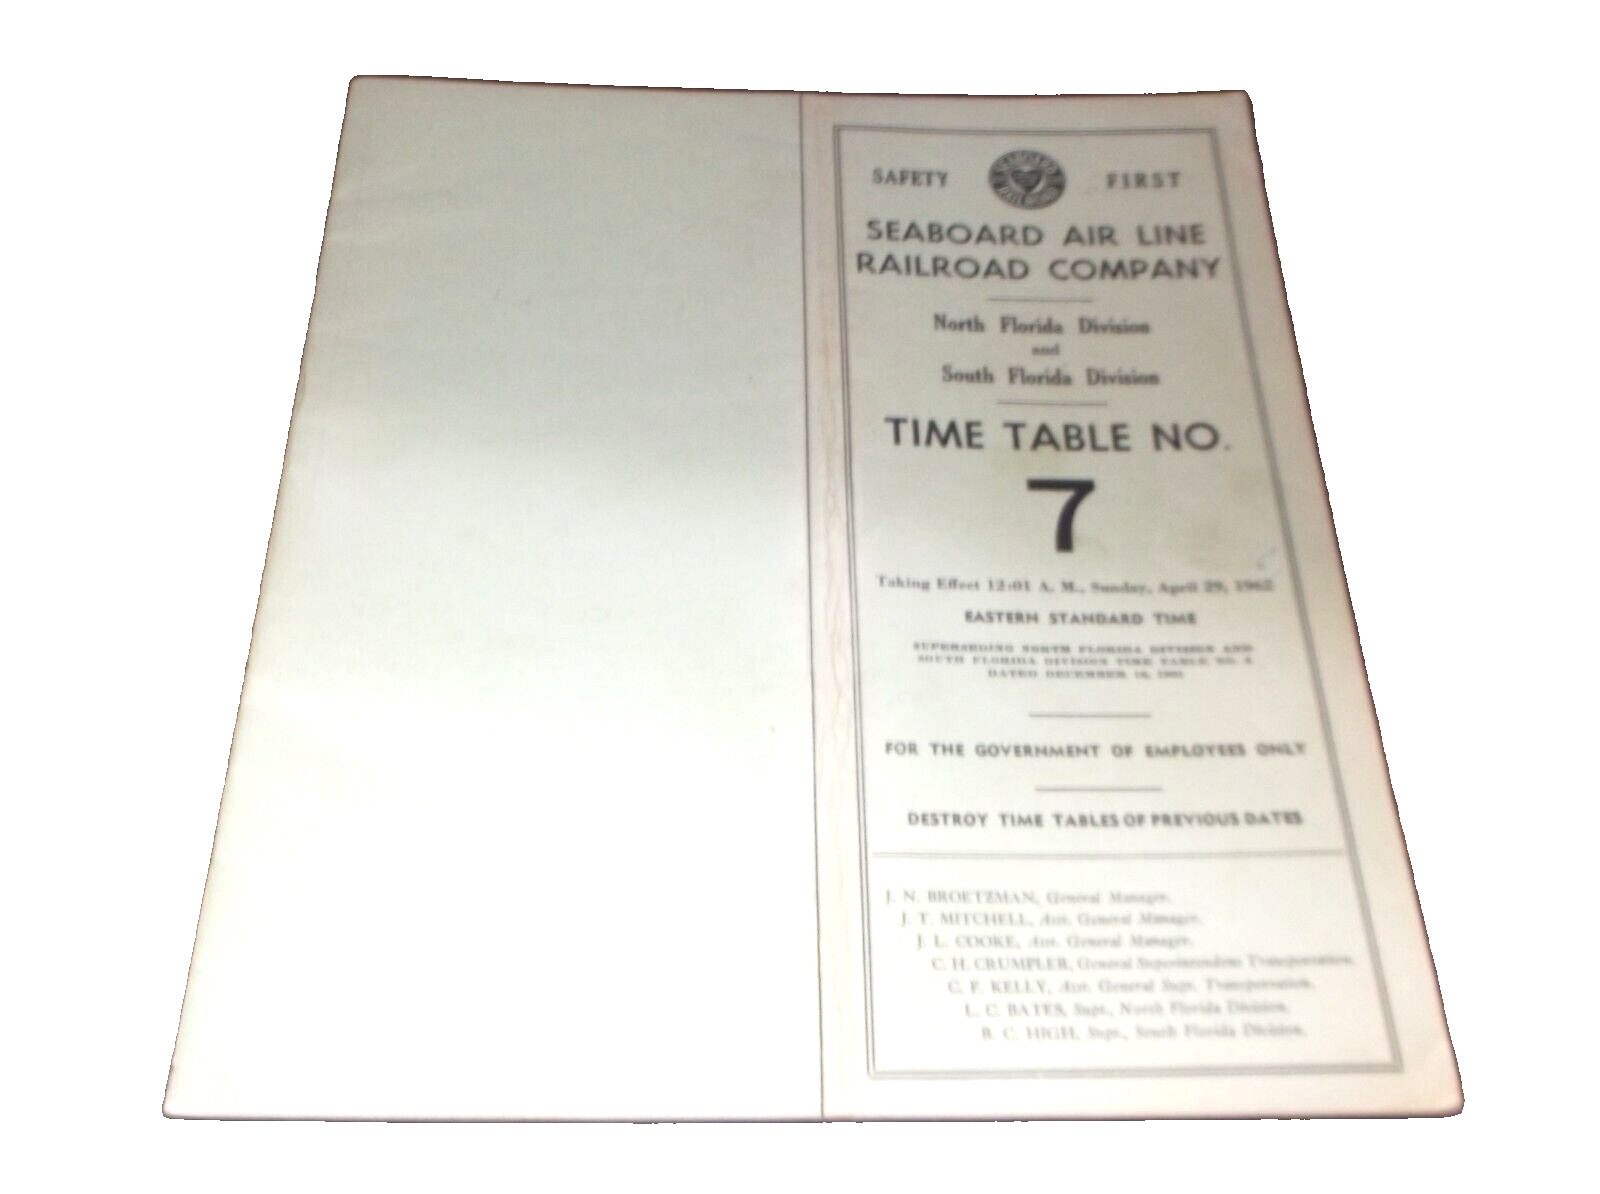 APRIL 1962 SAL SEABOARD AIR LINE NORTH SOUTH FLORIDA DIVISION TIMETABLE #7